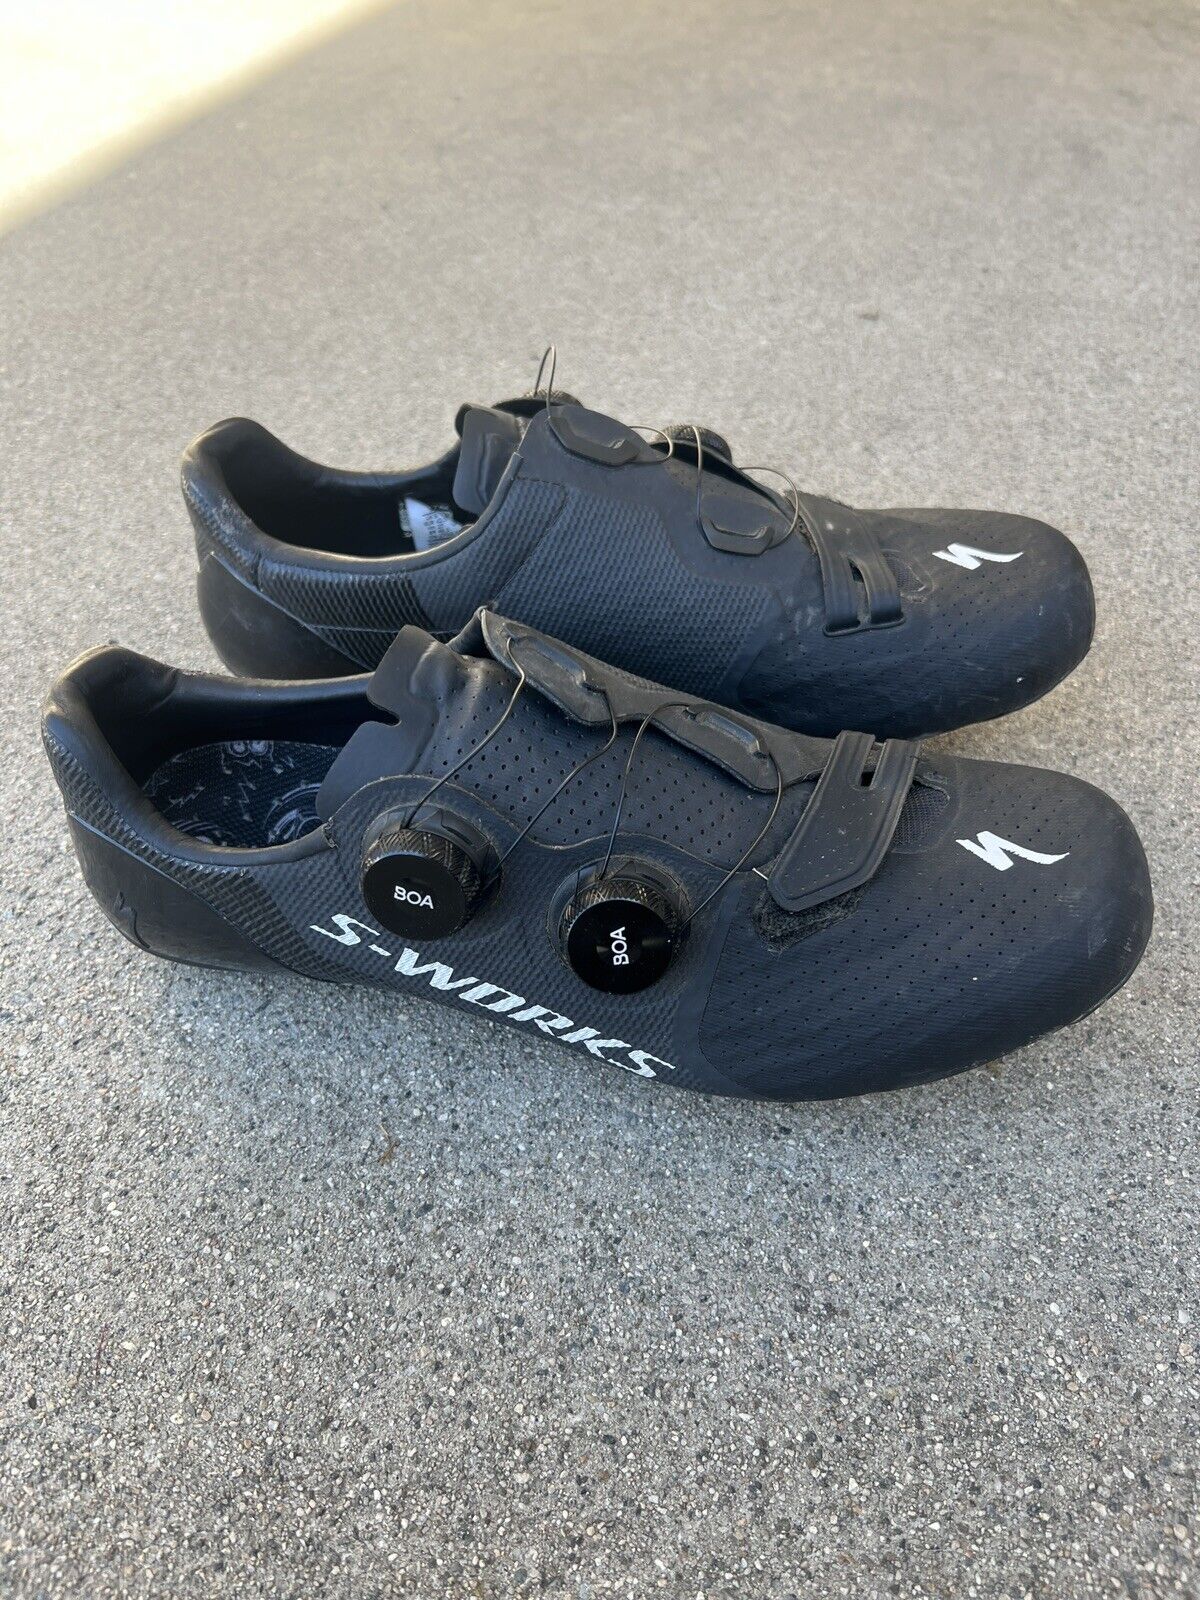 Specialized S Works 7 Carbon Road Cycling Shoes Us 8.5 Uk 41.5 (no Insoles)